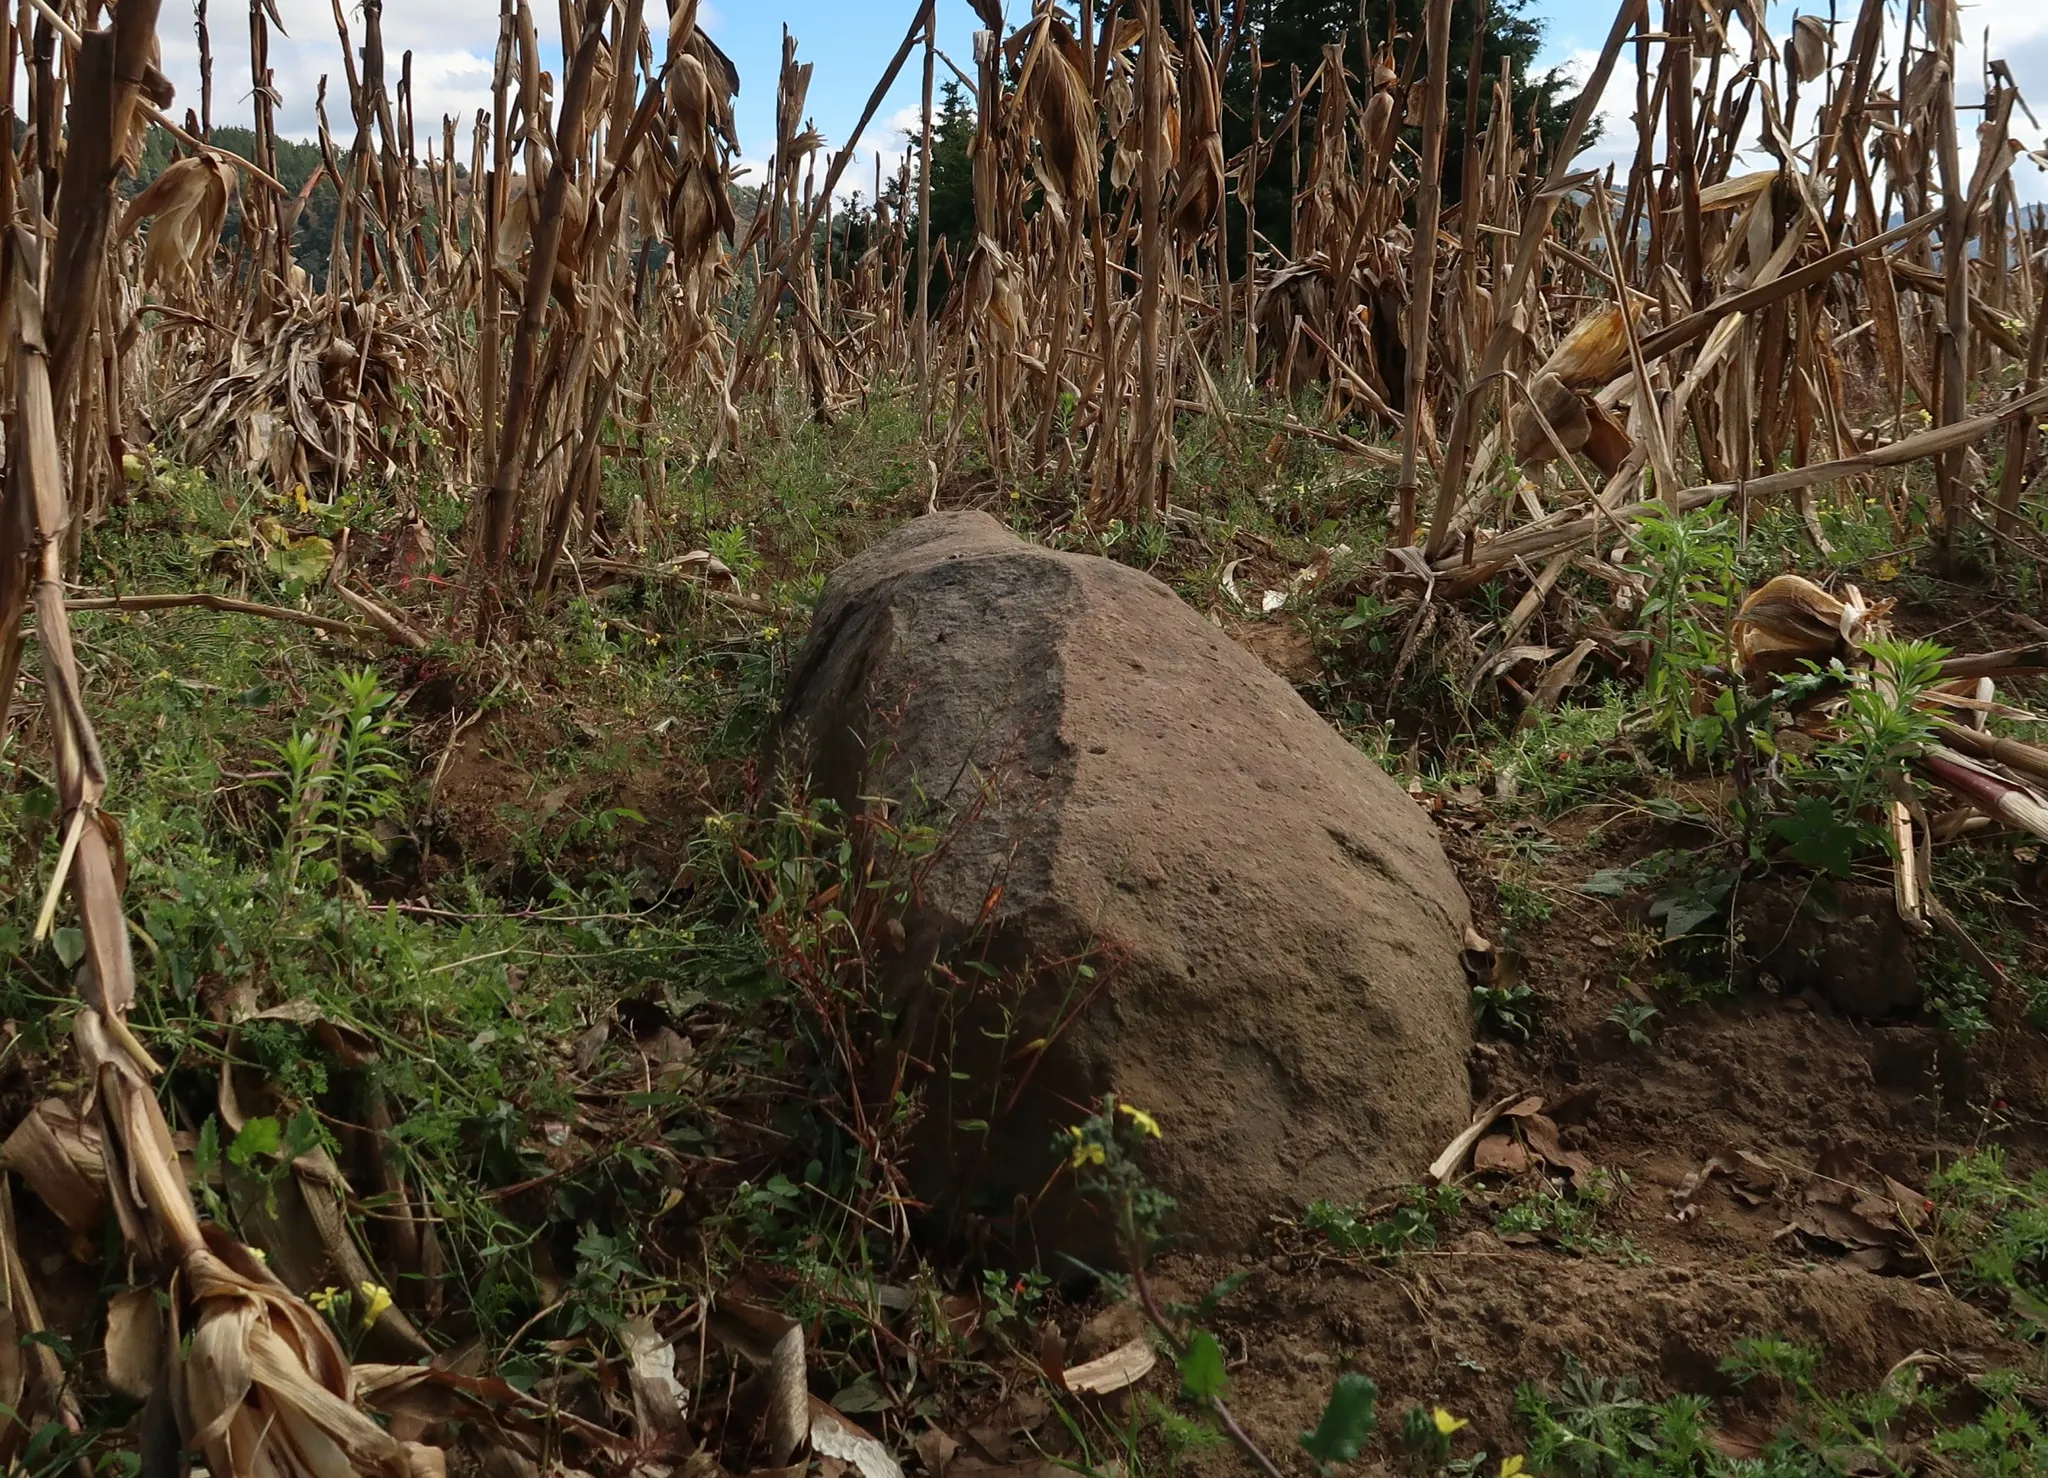 A rock amidst a field of dry corn